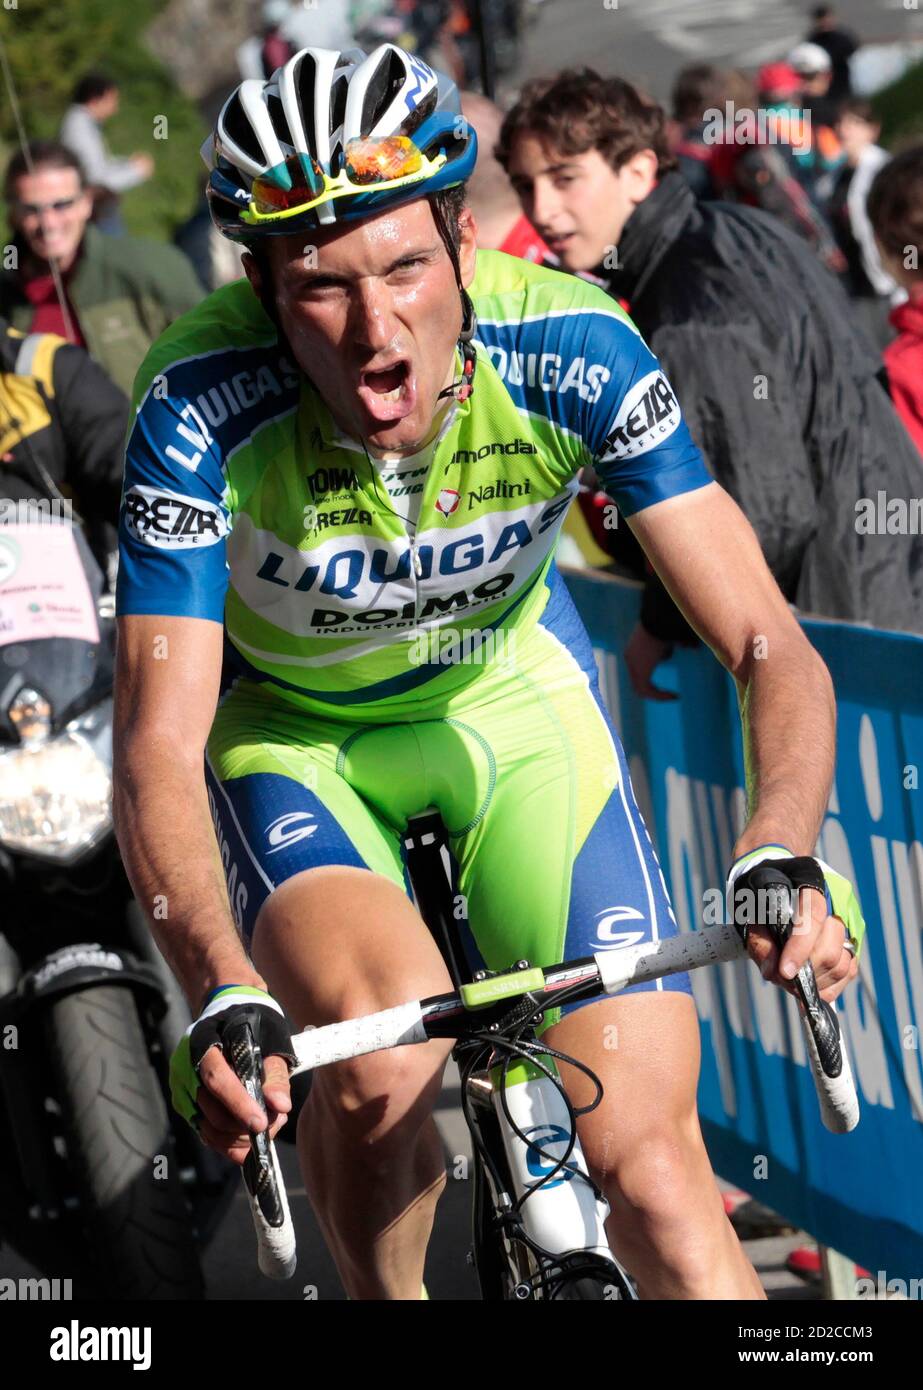 liquigas-rider-ivan-basso-of-italy-climbs-monte-zoncolan-on-his-way-to-winning-the-222-km-15th-stage-of-the-giro-ditalia-cycling-race-from-mestre-to-monte-zoncolan-may-23-2010-reutersalessandro-trovatipool-italy-tags-sport-cycling-2D2CCM3.jpg